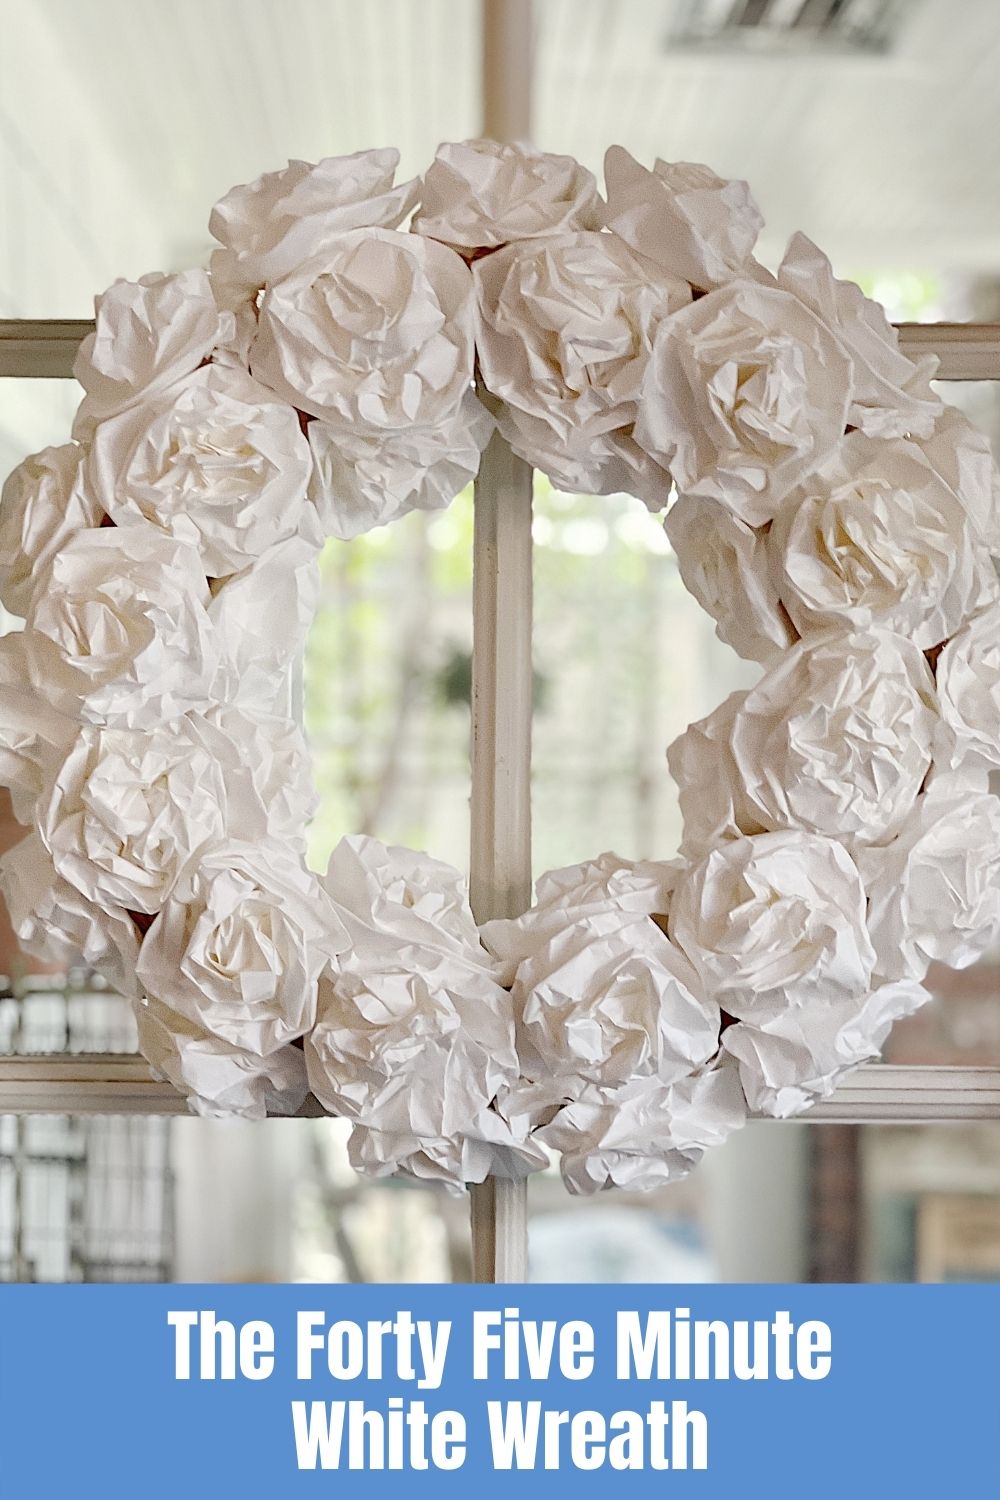 You all loved the five-minute wreath I made last month so I decided to make another one. This time I am making a Forty-Five Minute White Wreath with paper lunch bags!